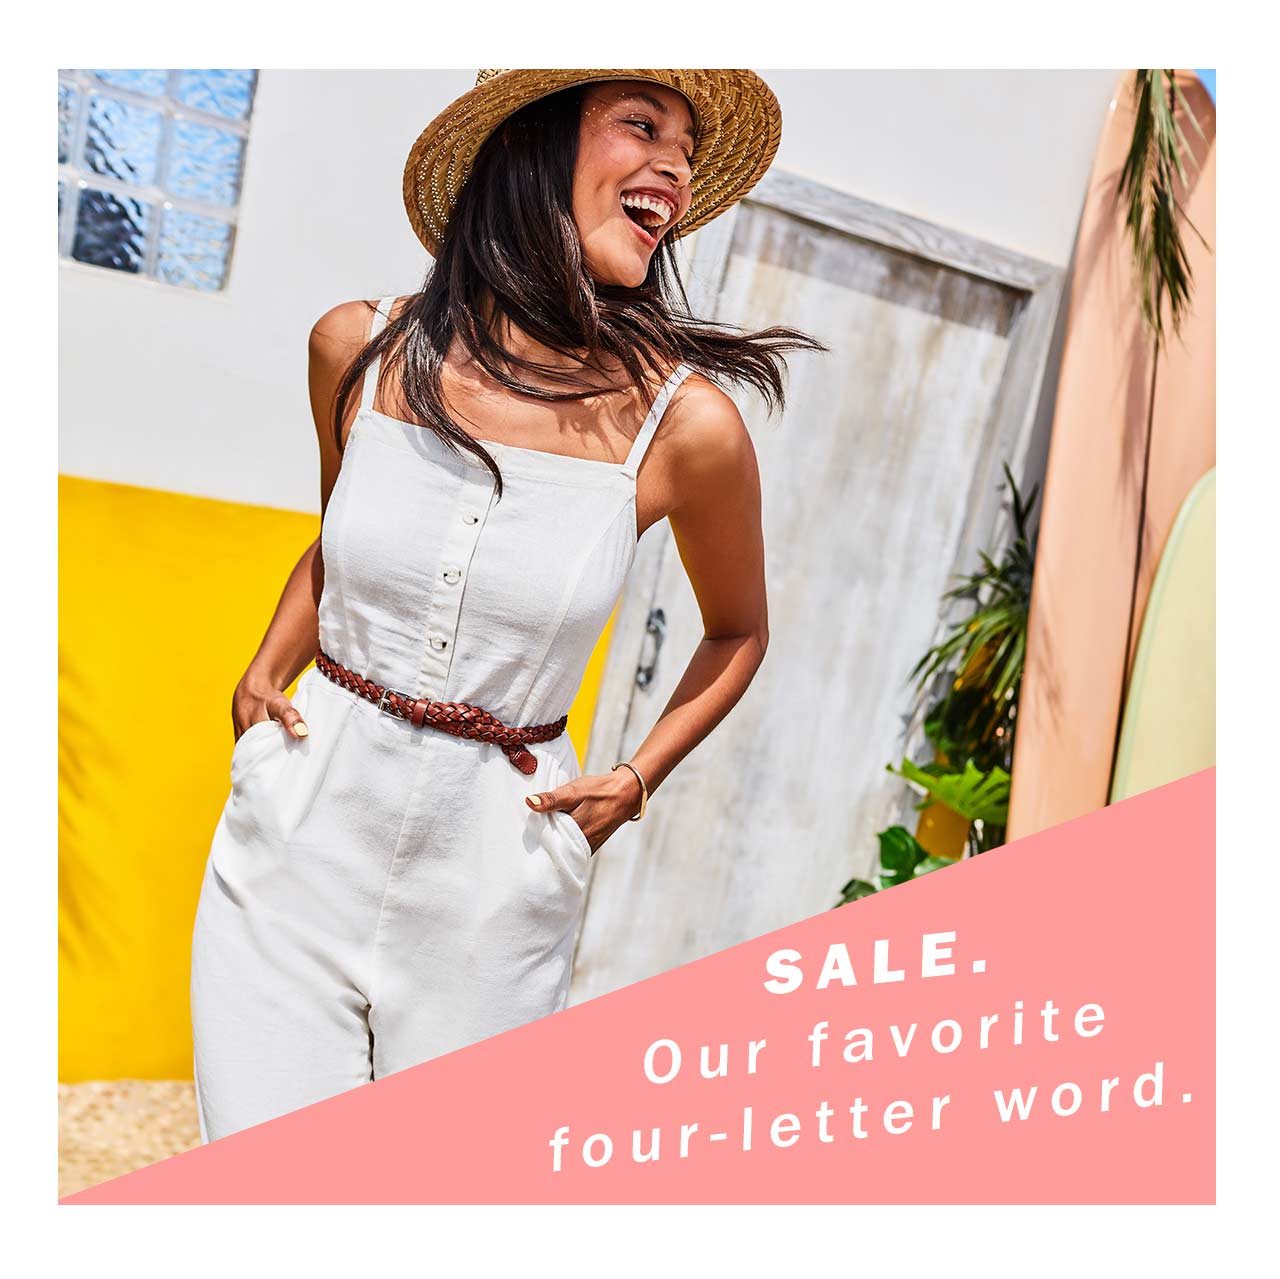 sale. Our favorite four-letter word.